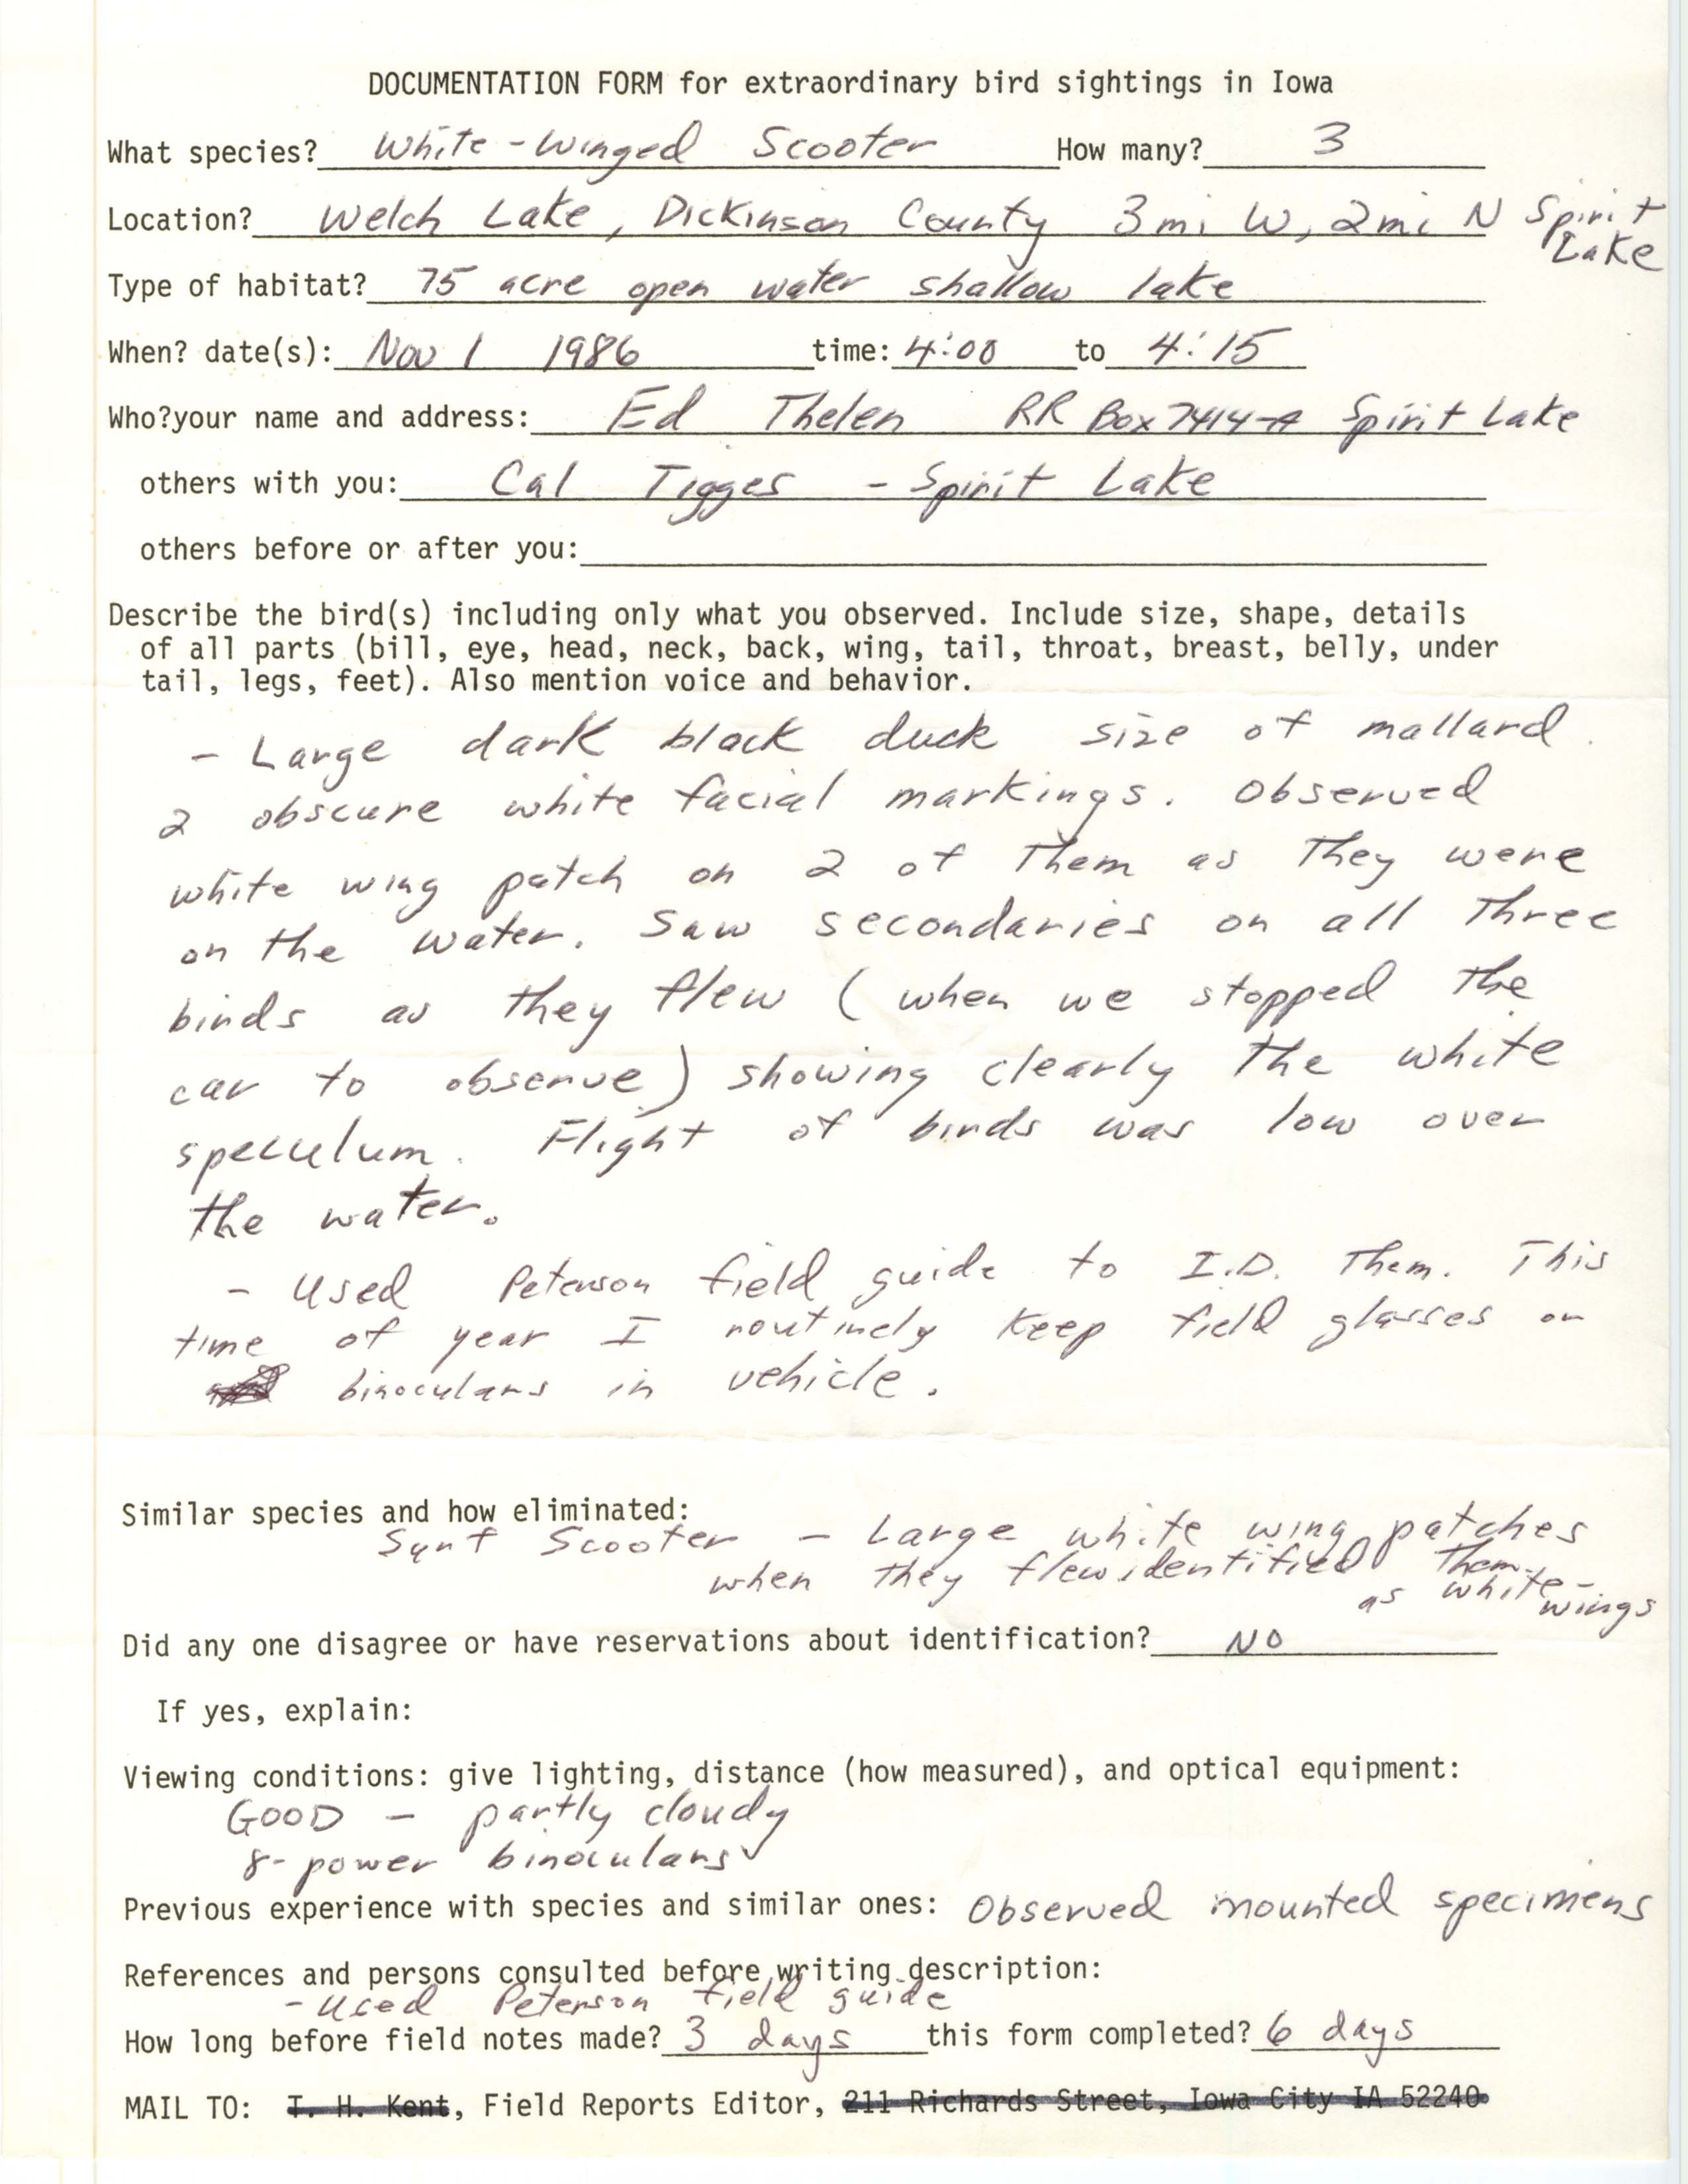 Rare bird documentation form for White-winged Scoter at Welch Lake, 1986